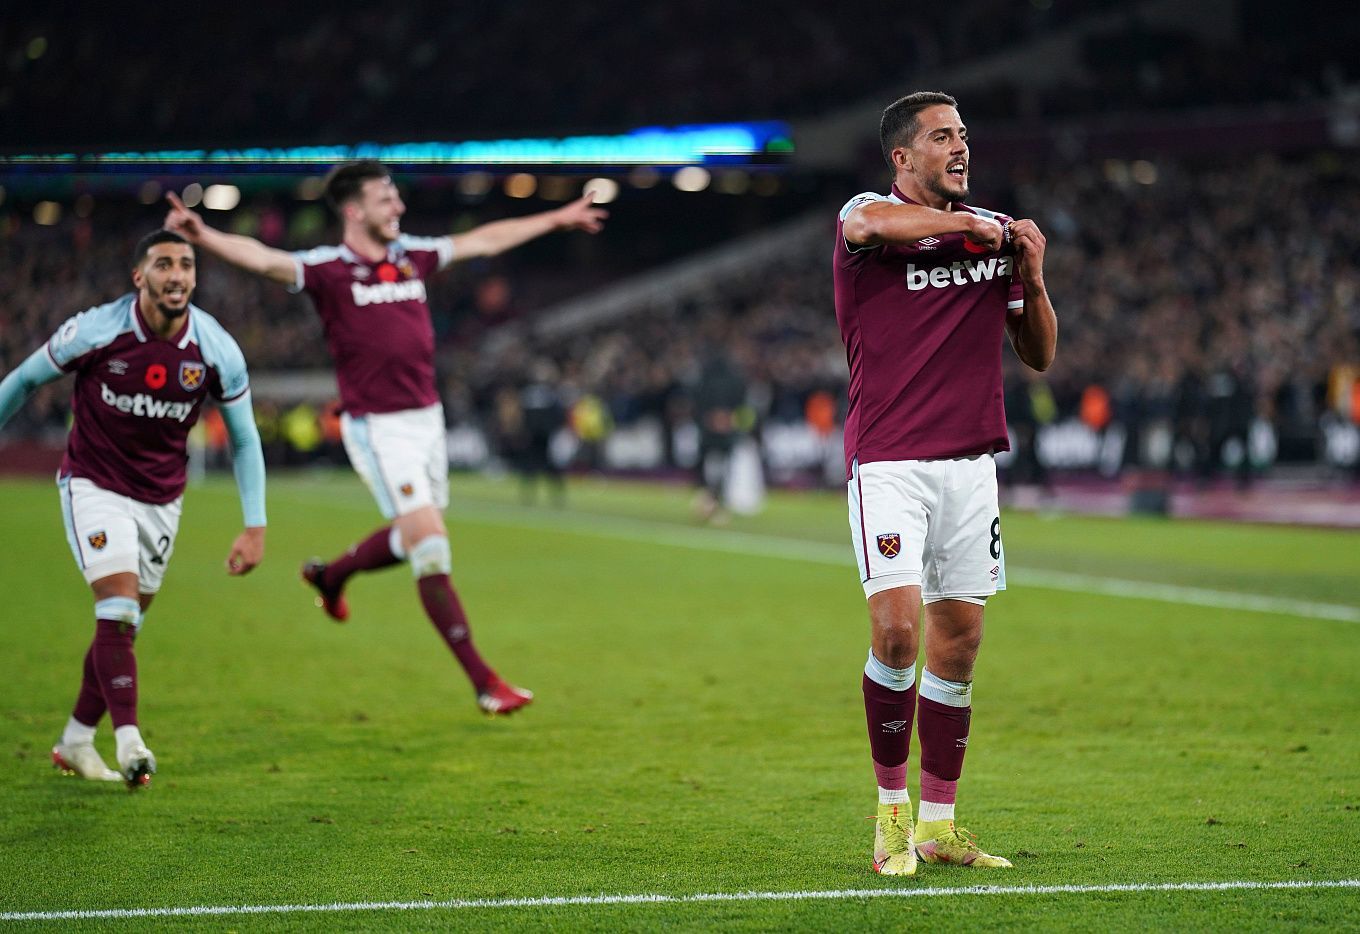 Crystal Palace vs West Ham Prediction, Betting Tips & Odds │1 JANUARY, 2022